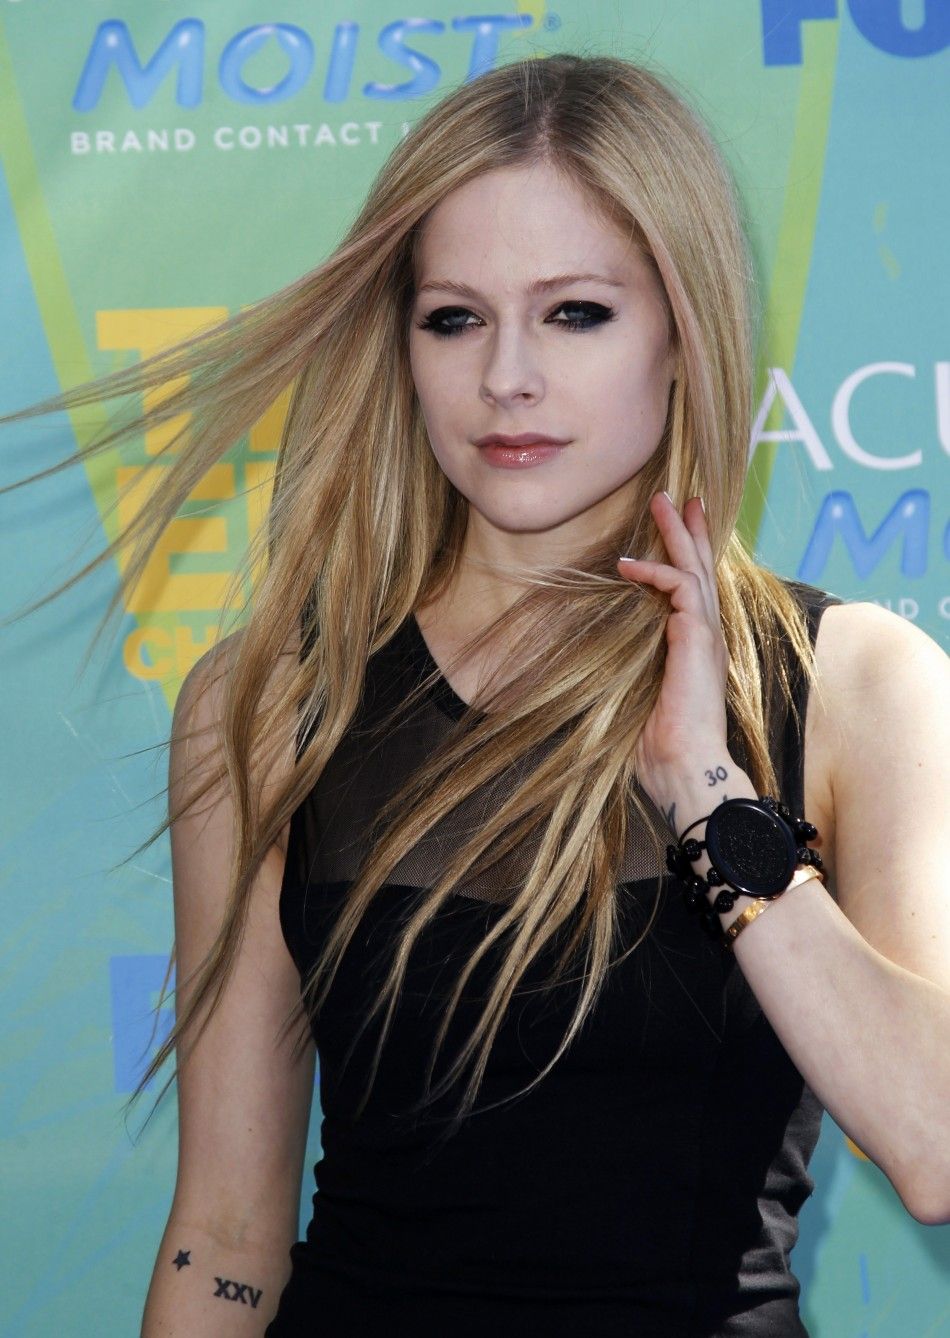 Canadian singer Avril Lavigne arrives at the Teen Choice Awards in Los Angeles